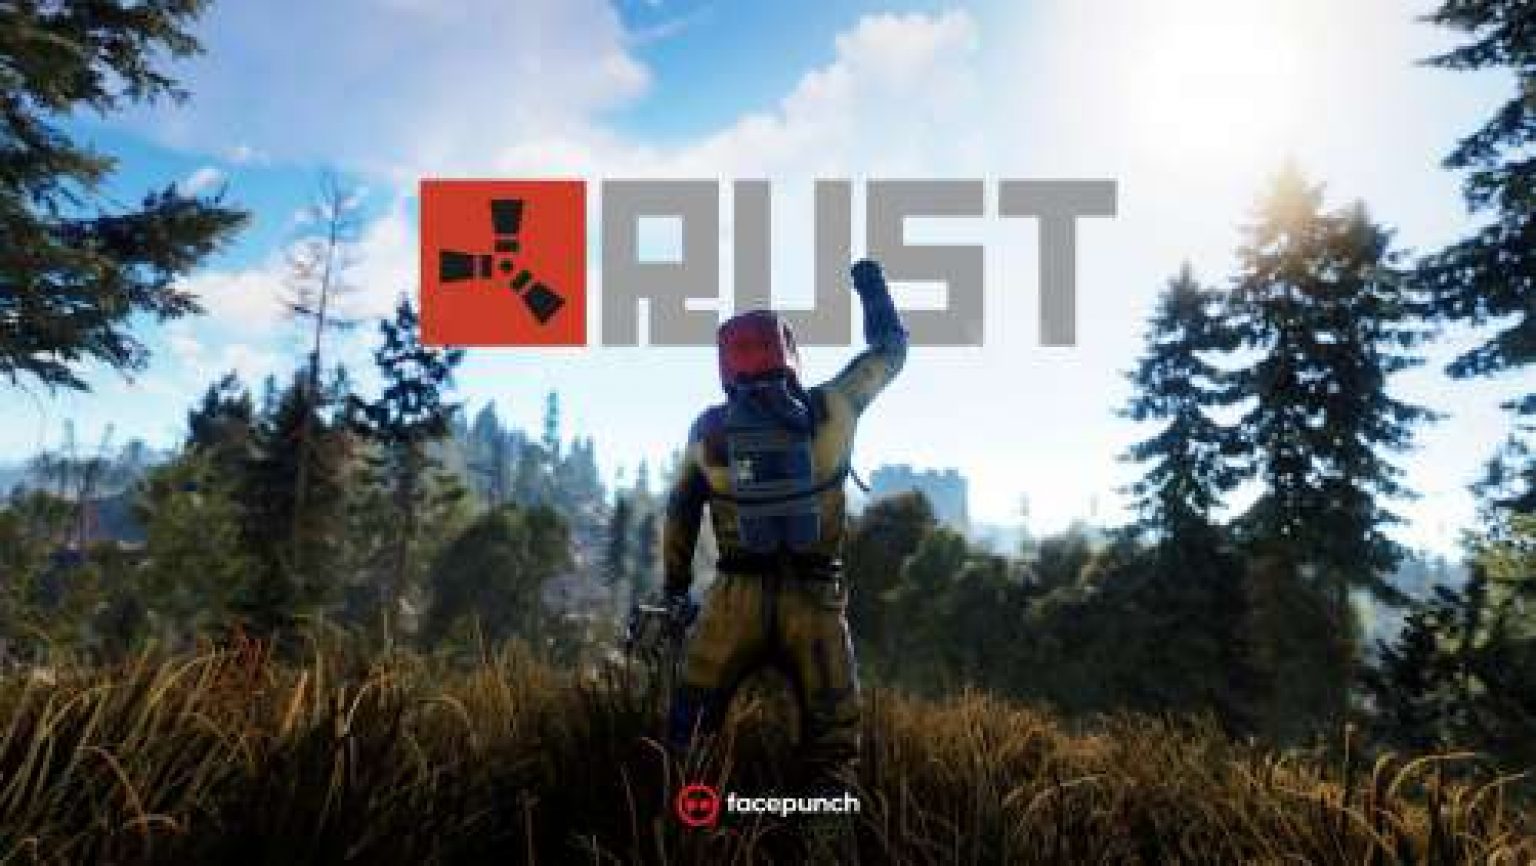 rust free download pc